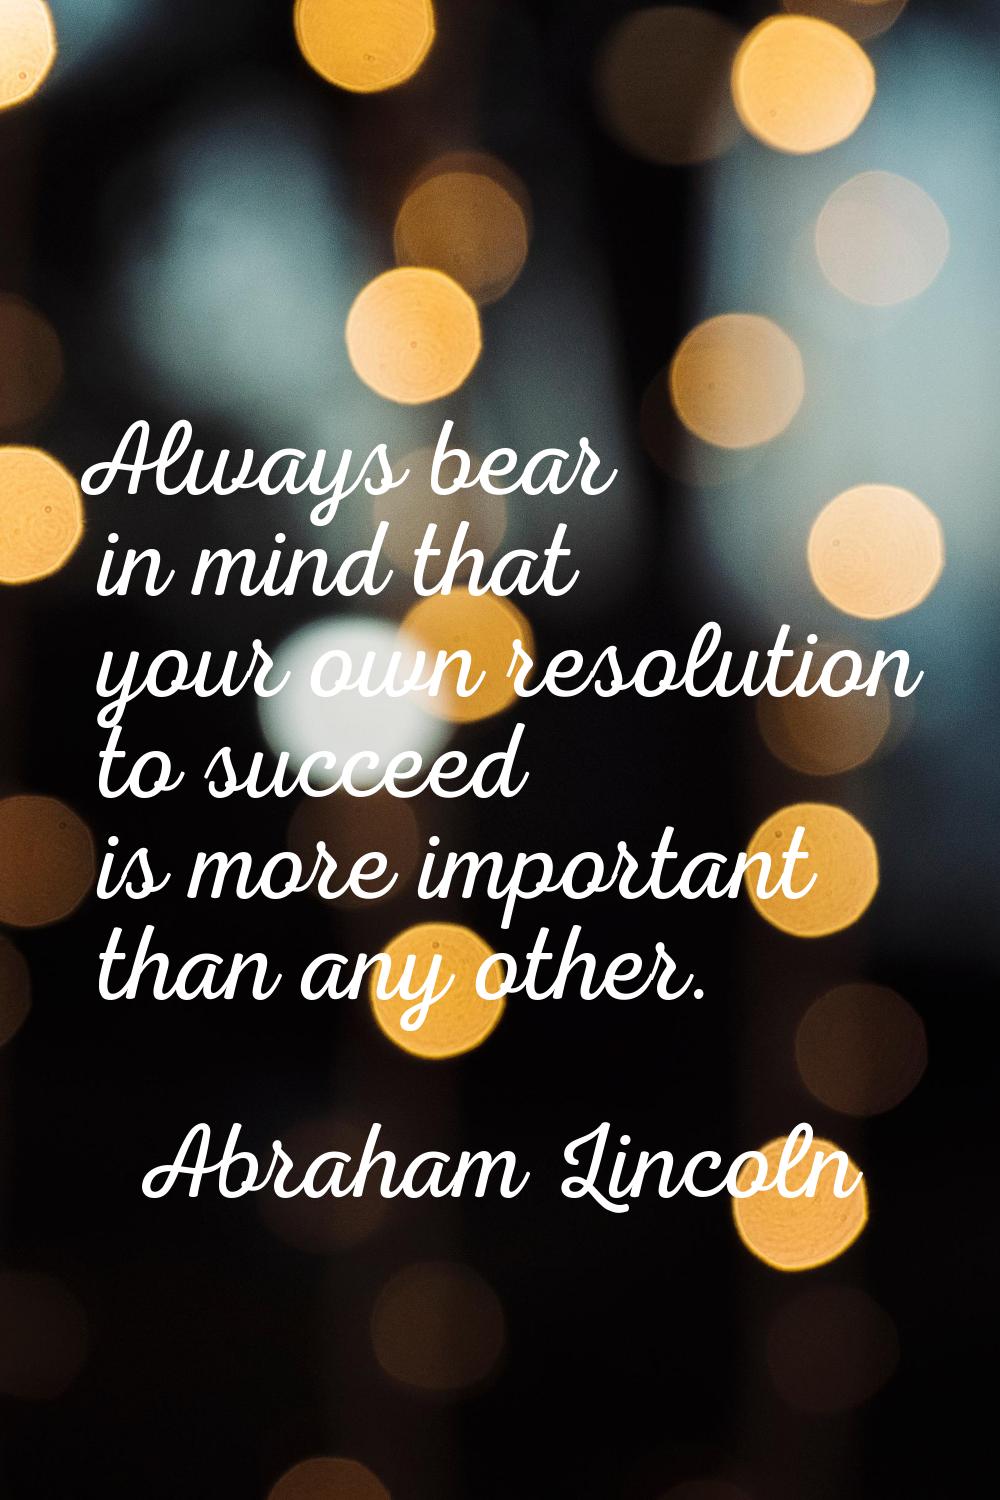 Always bear in mind that your own resolution to succeed is more important than any other.